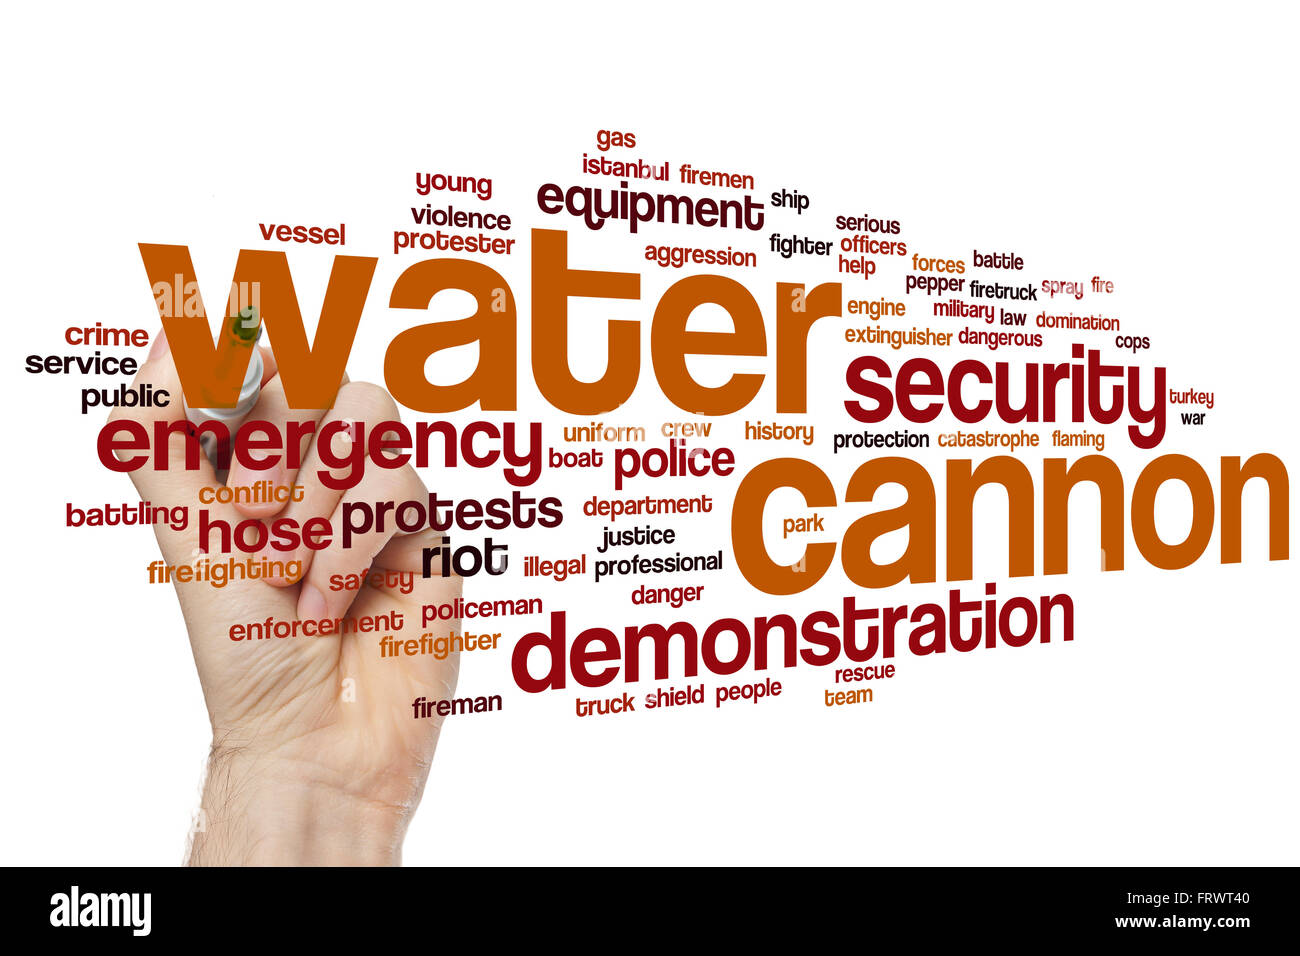 Water cannon word cloud concept Stock Photo